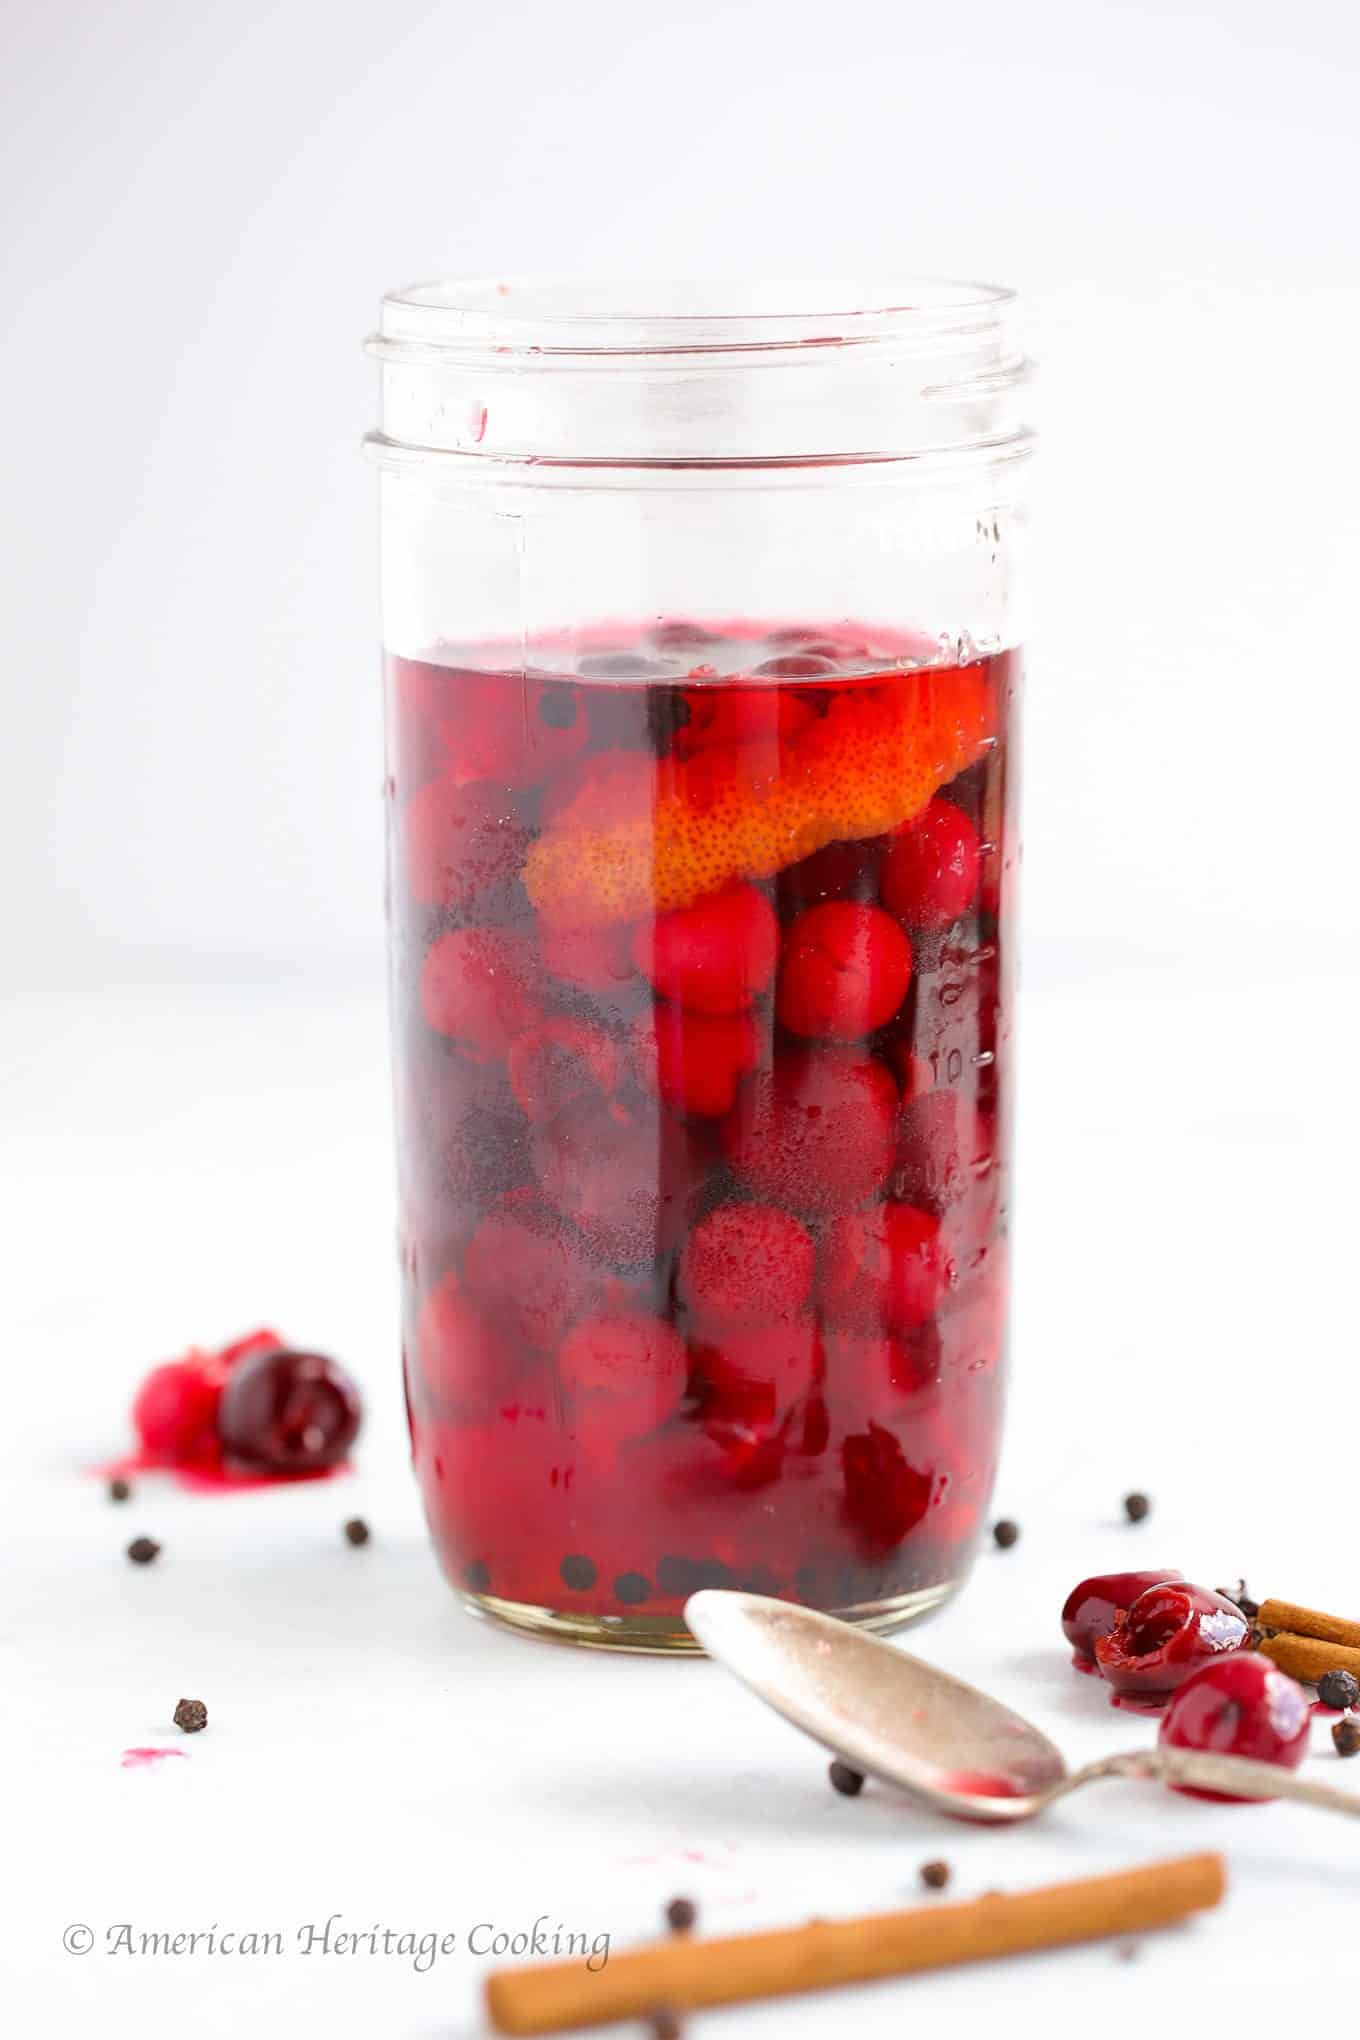 Pickled Cherries are an easy way to preserve tart or sweet cherries for the months to come! They make a zippy addition to any salad, chicken, pork, duck, or beef dish! And as an easy, delicious topping for tacos! 